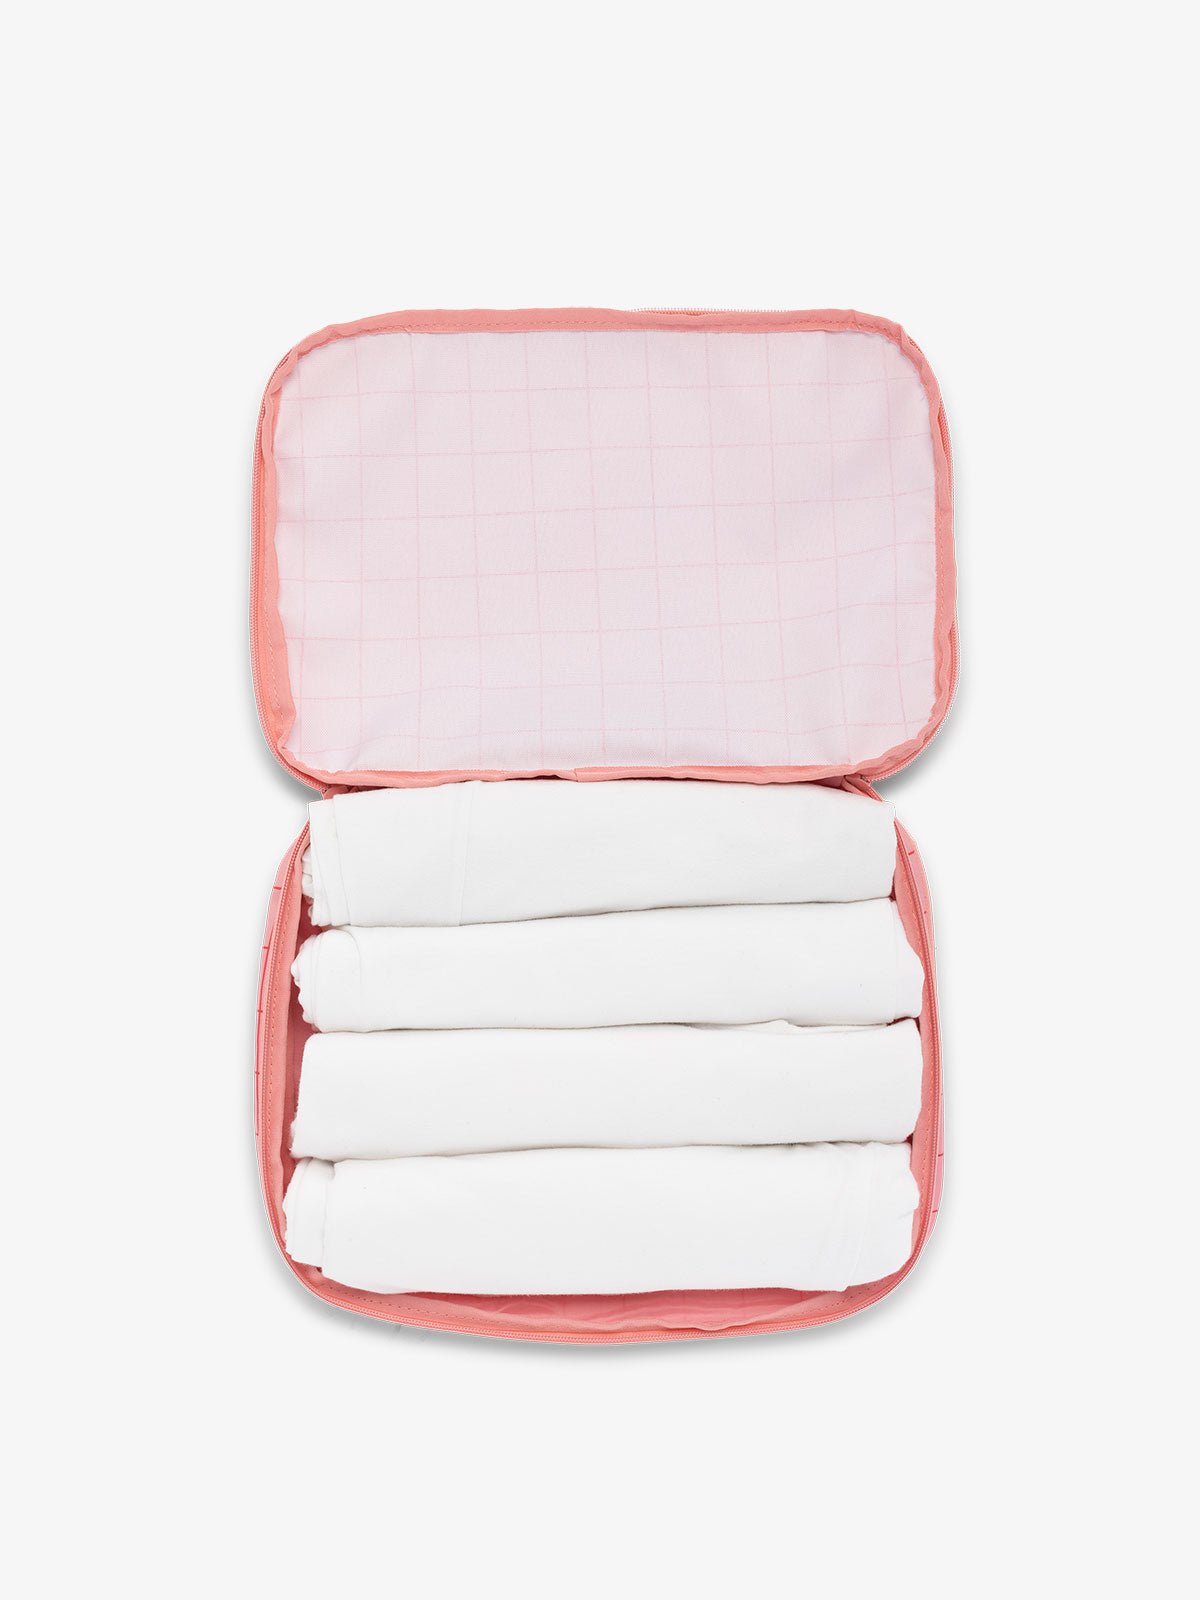 CALPAK packing cubes for travel in pink grid